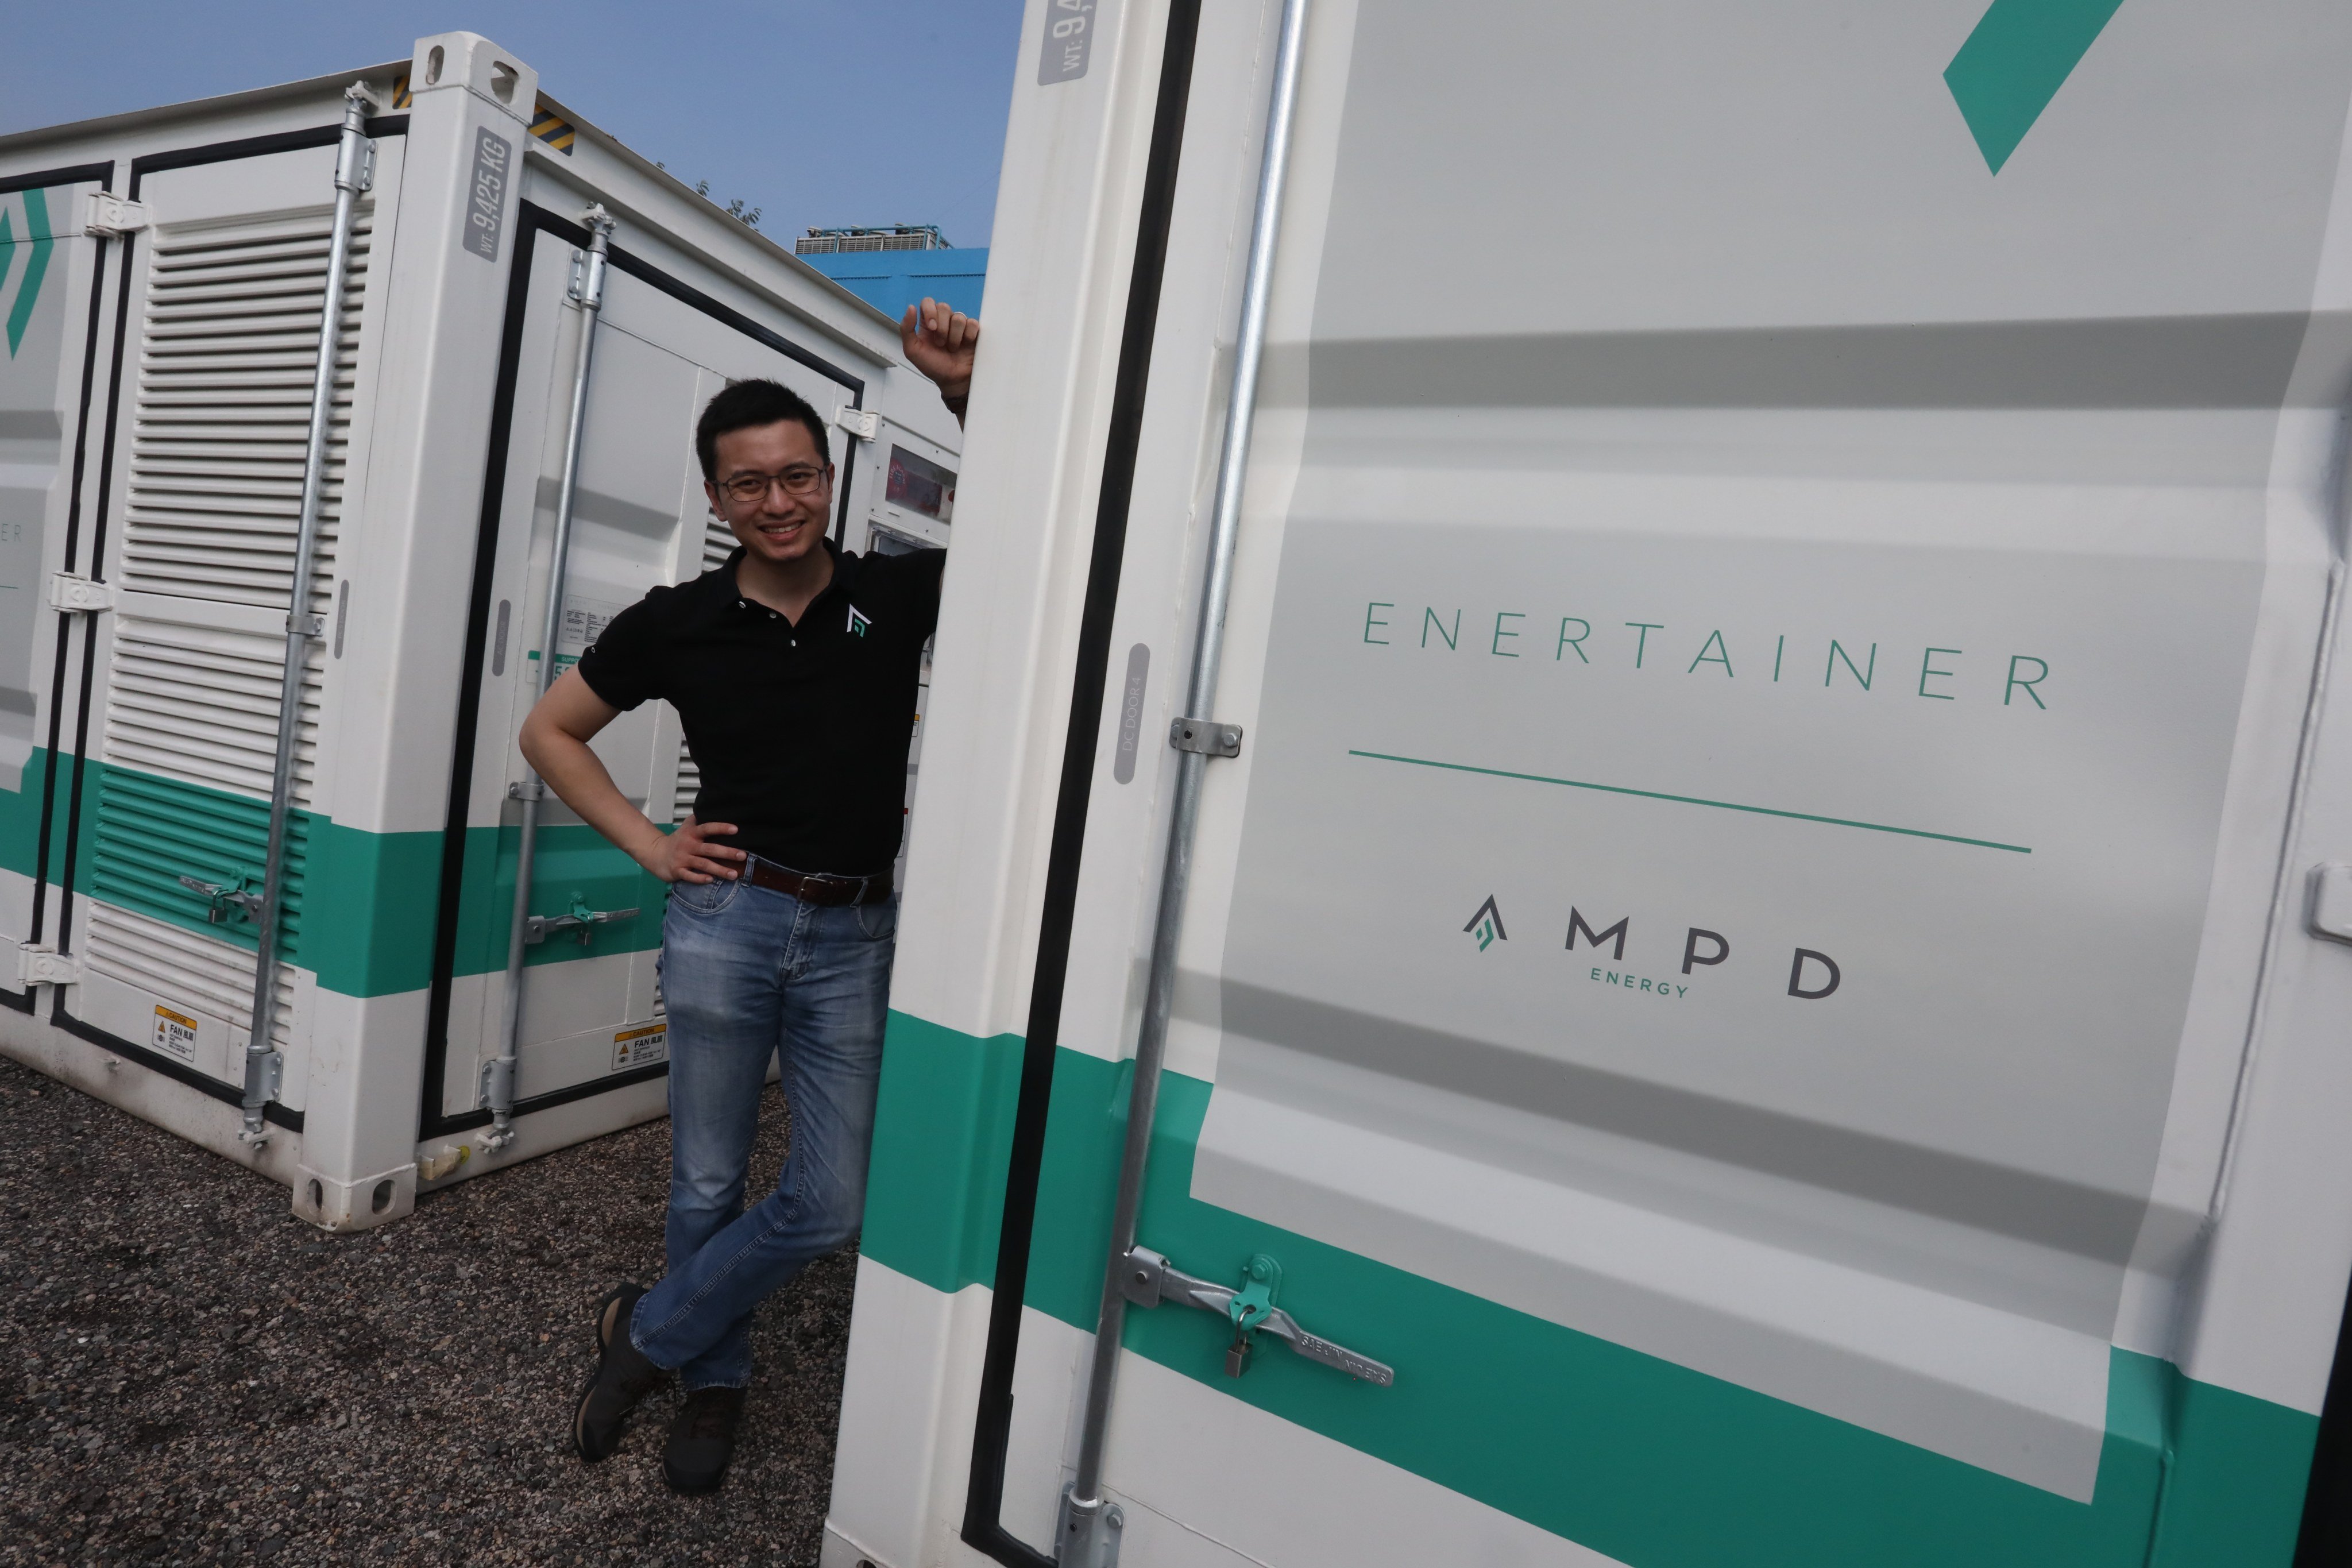 AMPD Energy’s CEO Brandon Ng with an AMPD Enertainer, a containerized energy storage system, at Tseung Kwan O Industrial Estate. Photo: SCMP/ Jonathan Wong